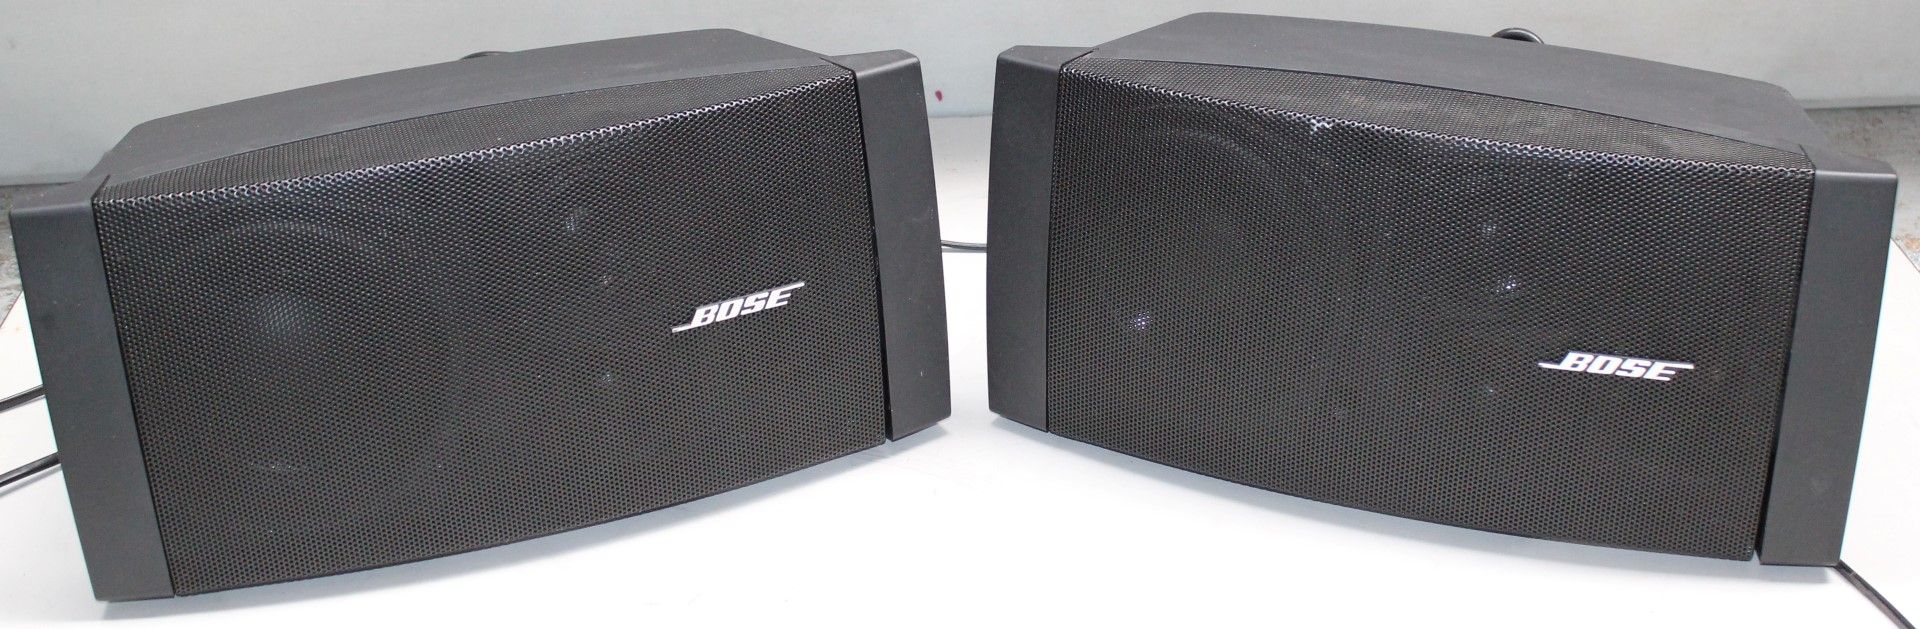 2 x Bose Freespace DS 100SE Loudspeakers - Professional Loudspeakers Suitable For The Homes, - Image 2 of 6